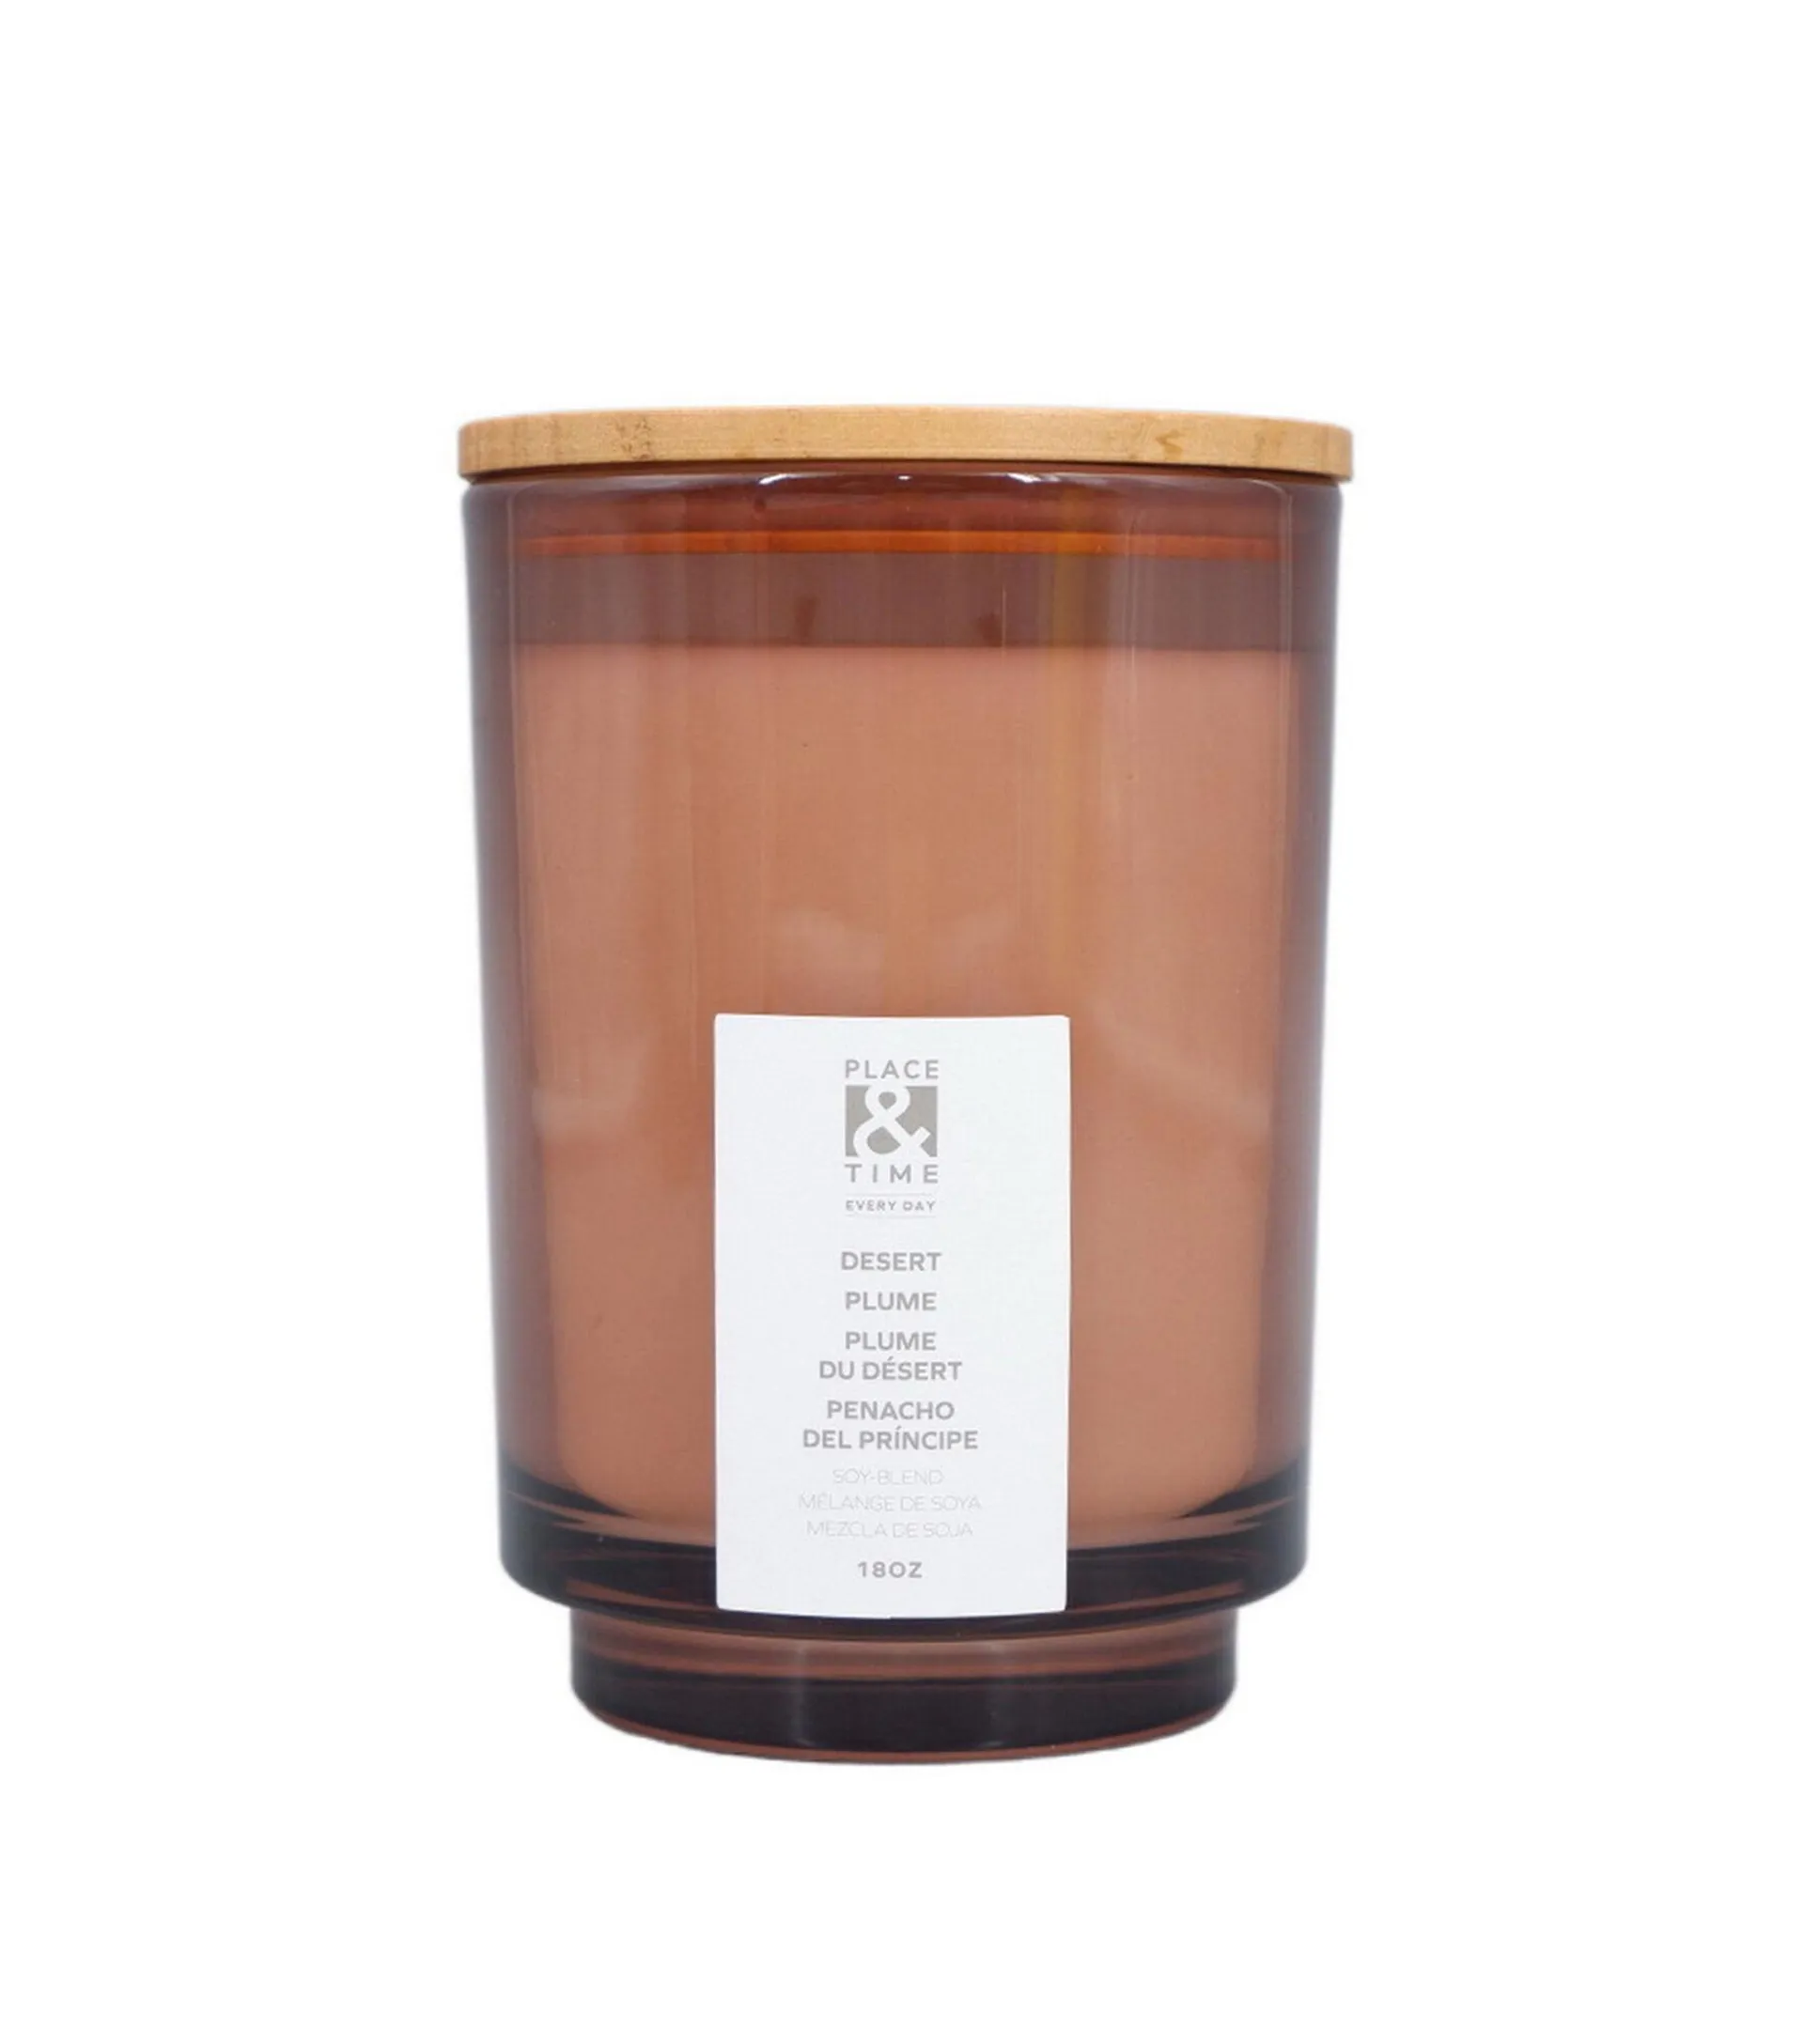 18oz Scented Jar Candle With Cork Lid by Place & Time